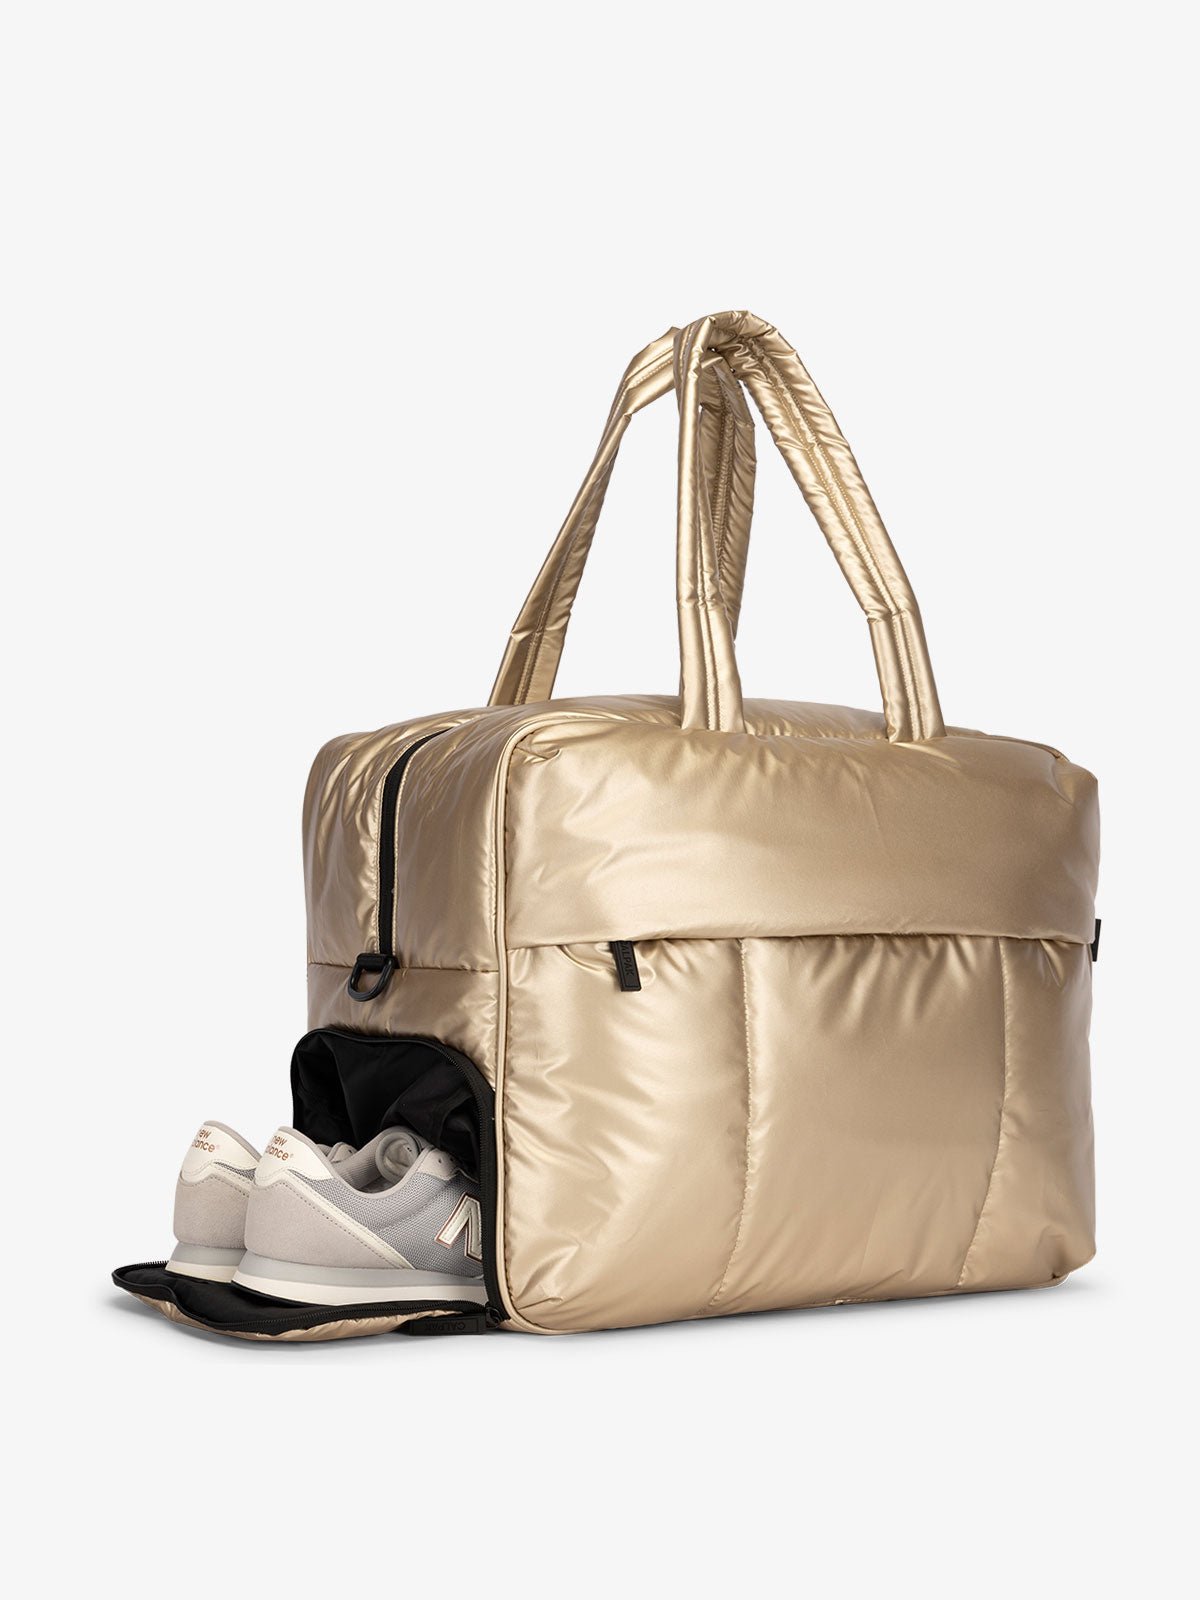 CALPAK Luka large duffel bag with side shoe compartment and dual handles in metallic gold